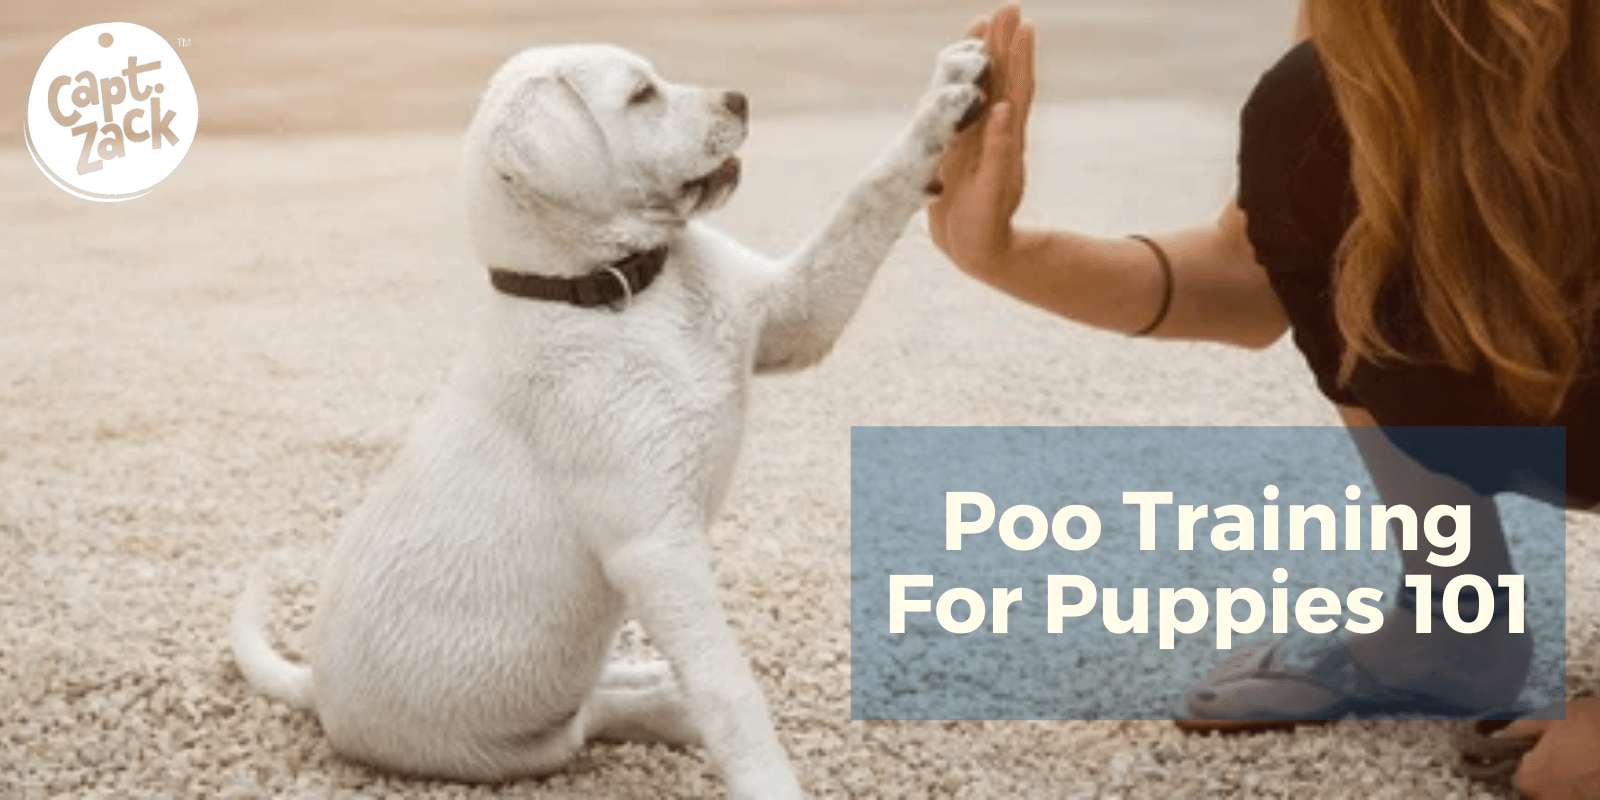 Poo Training For Puppies 101